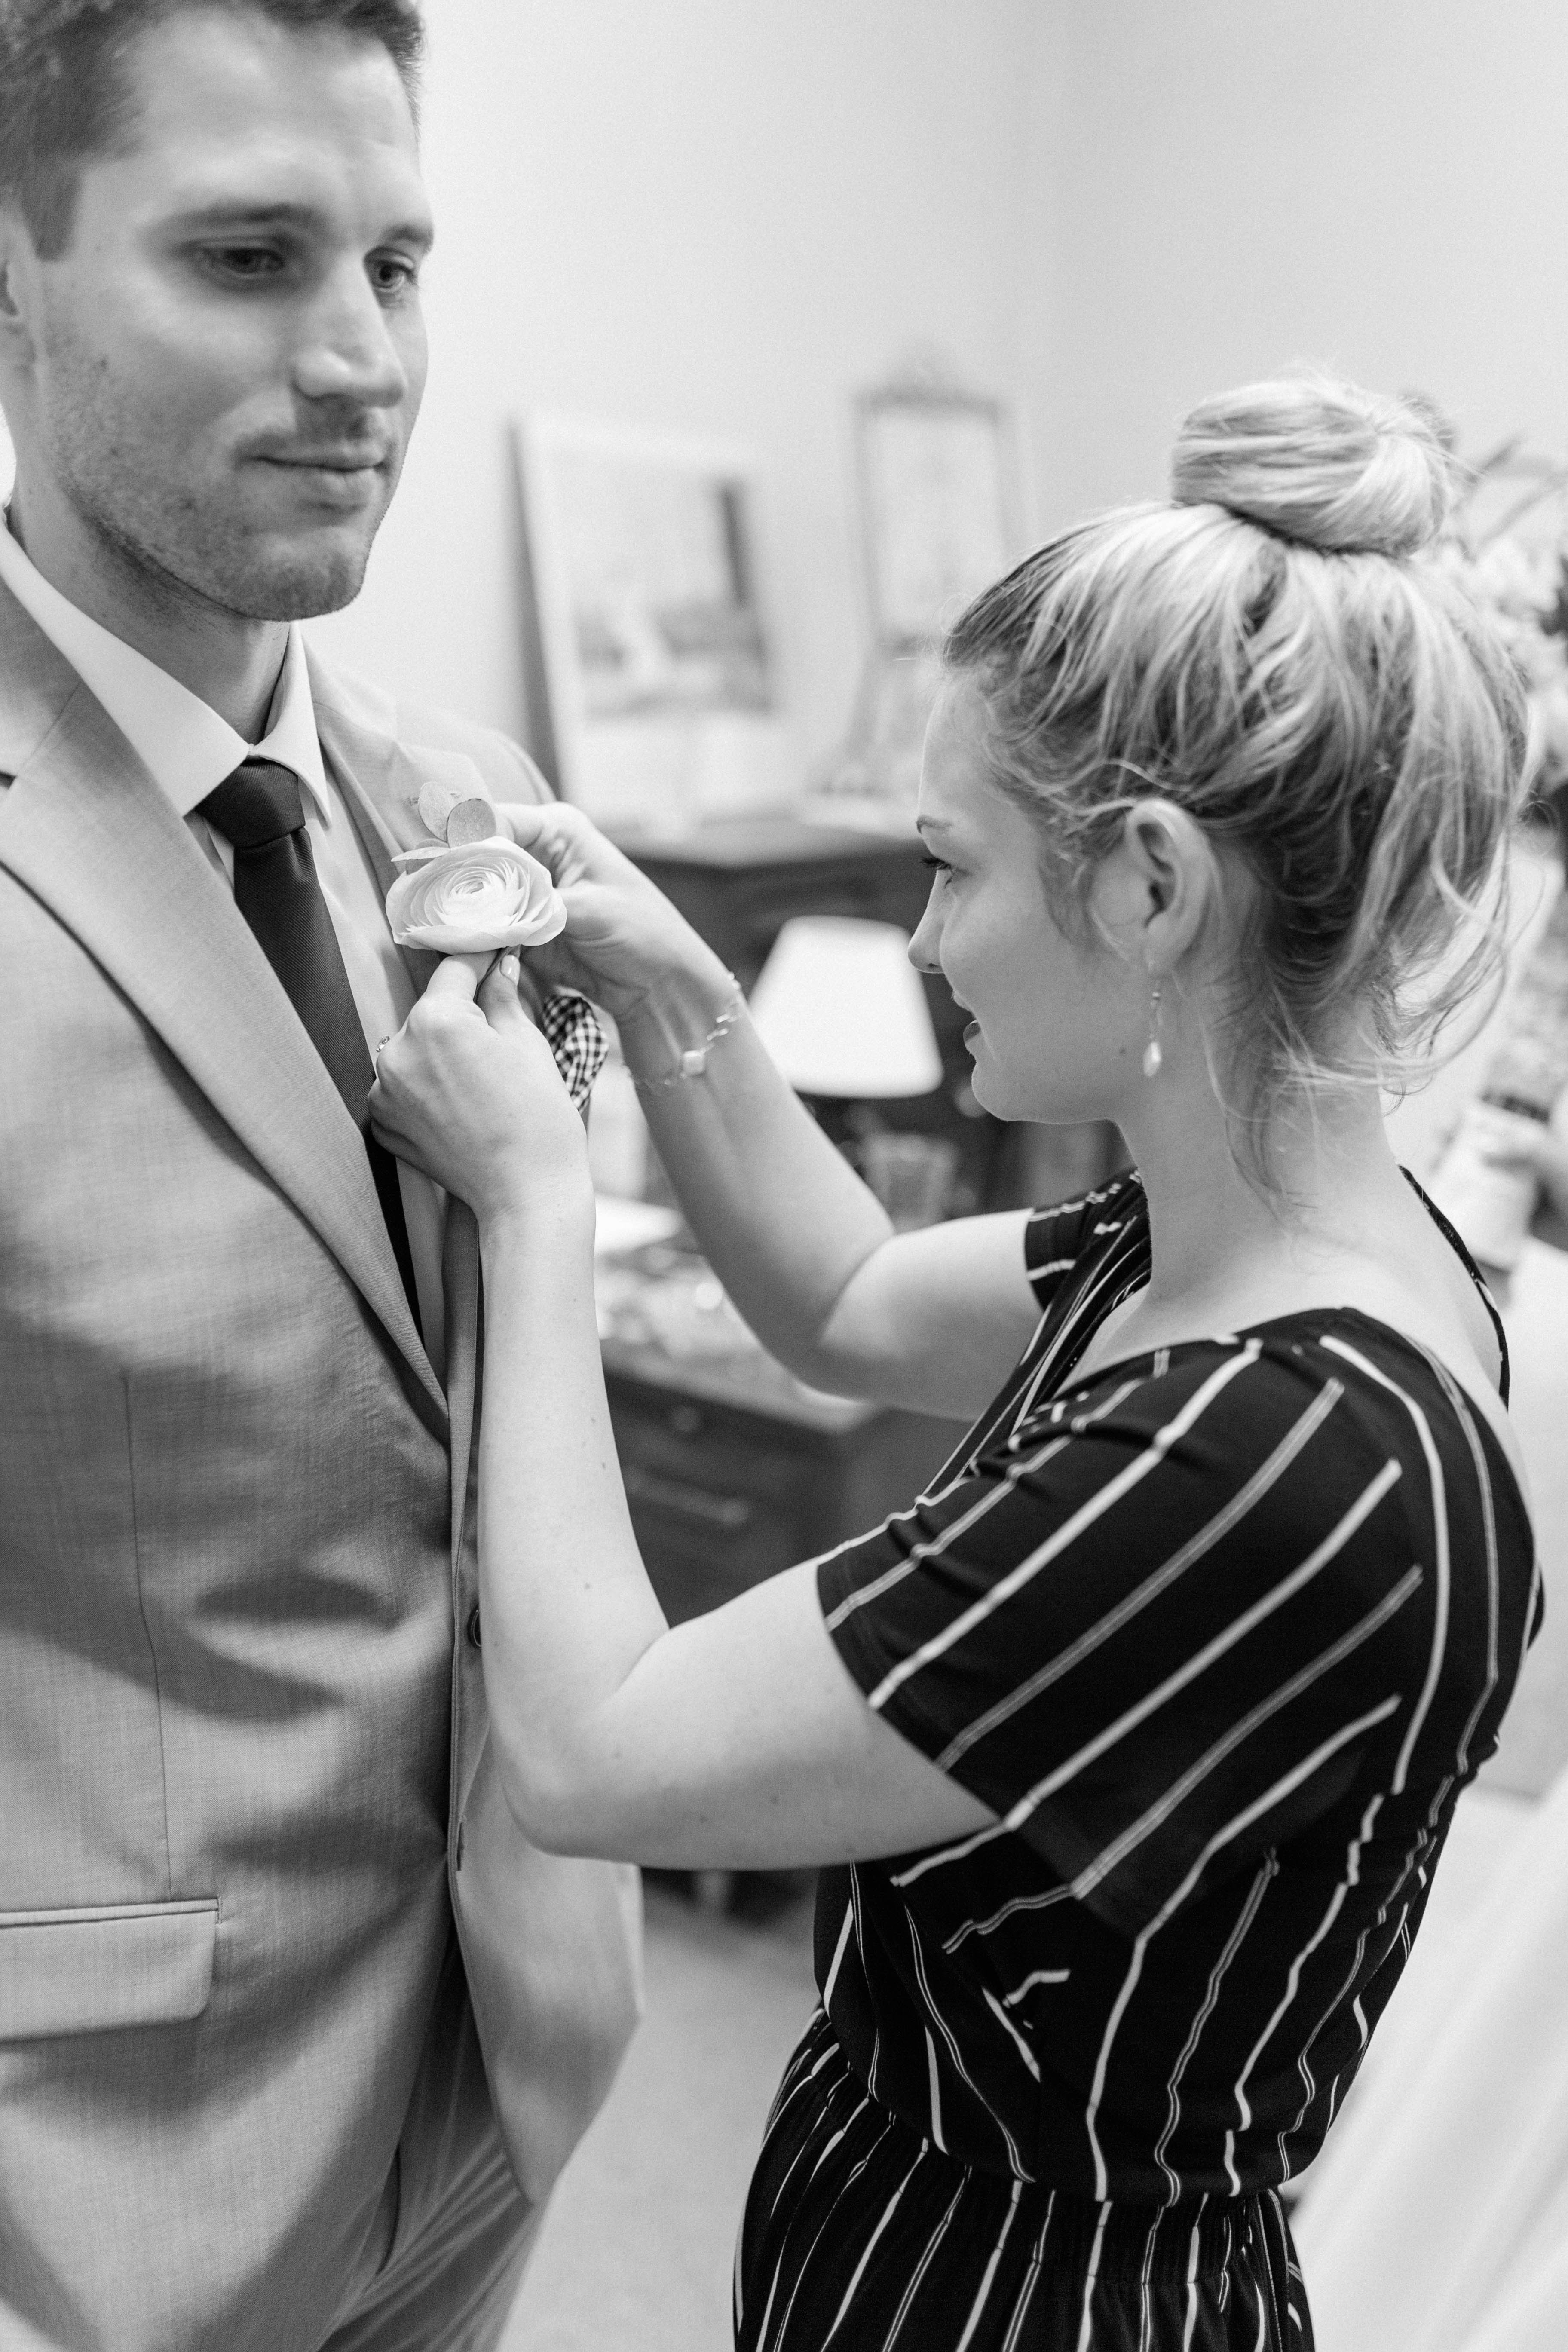 2018 Behind The Scenes of Sweet Williams Photography, Nashville, Tennesee Wedding, and Portrait Photographer. 